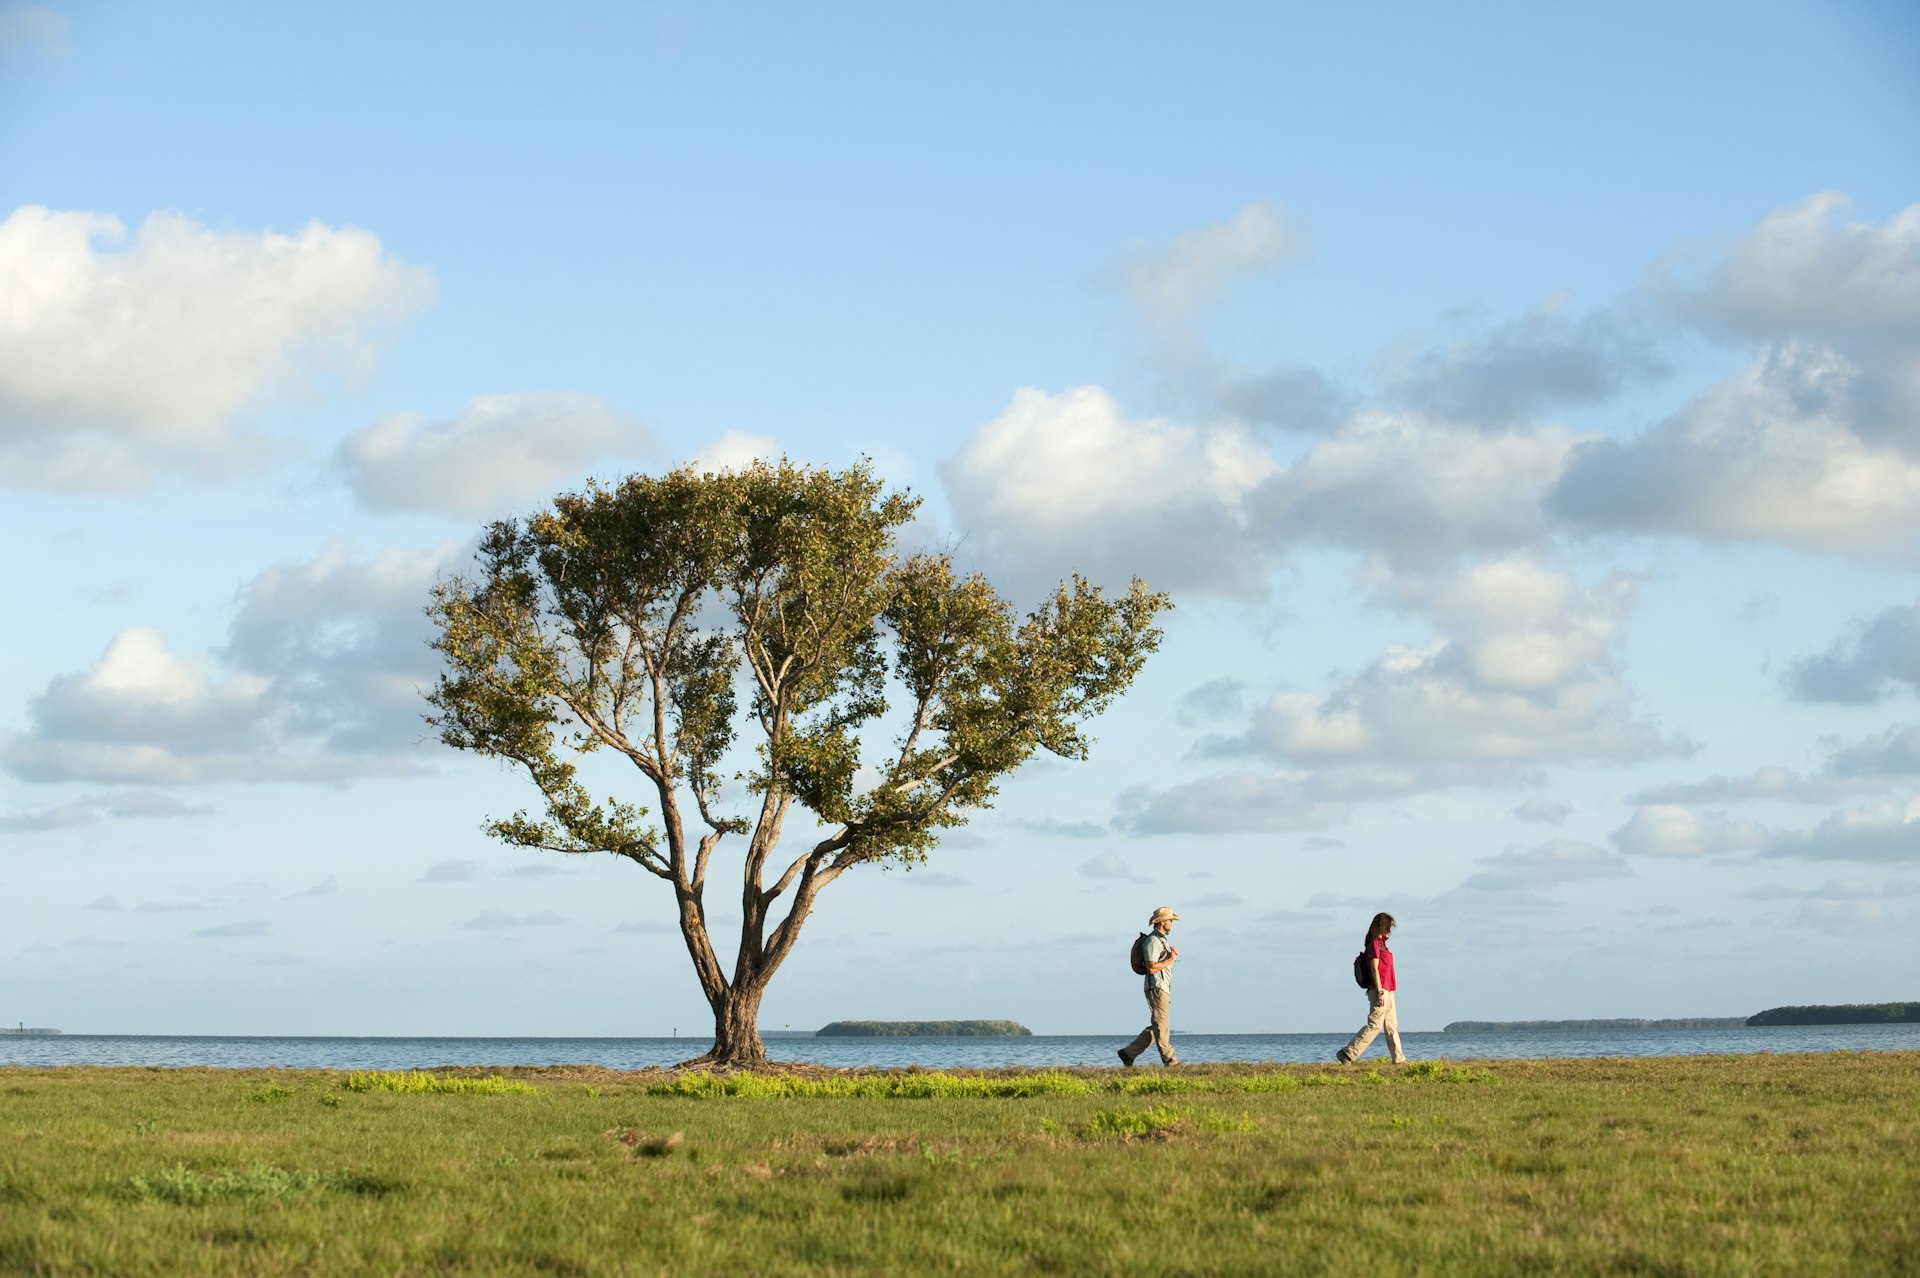 Two people hiking under a tree in Everglades National Park, Florida, USA